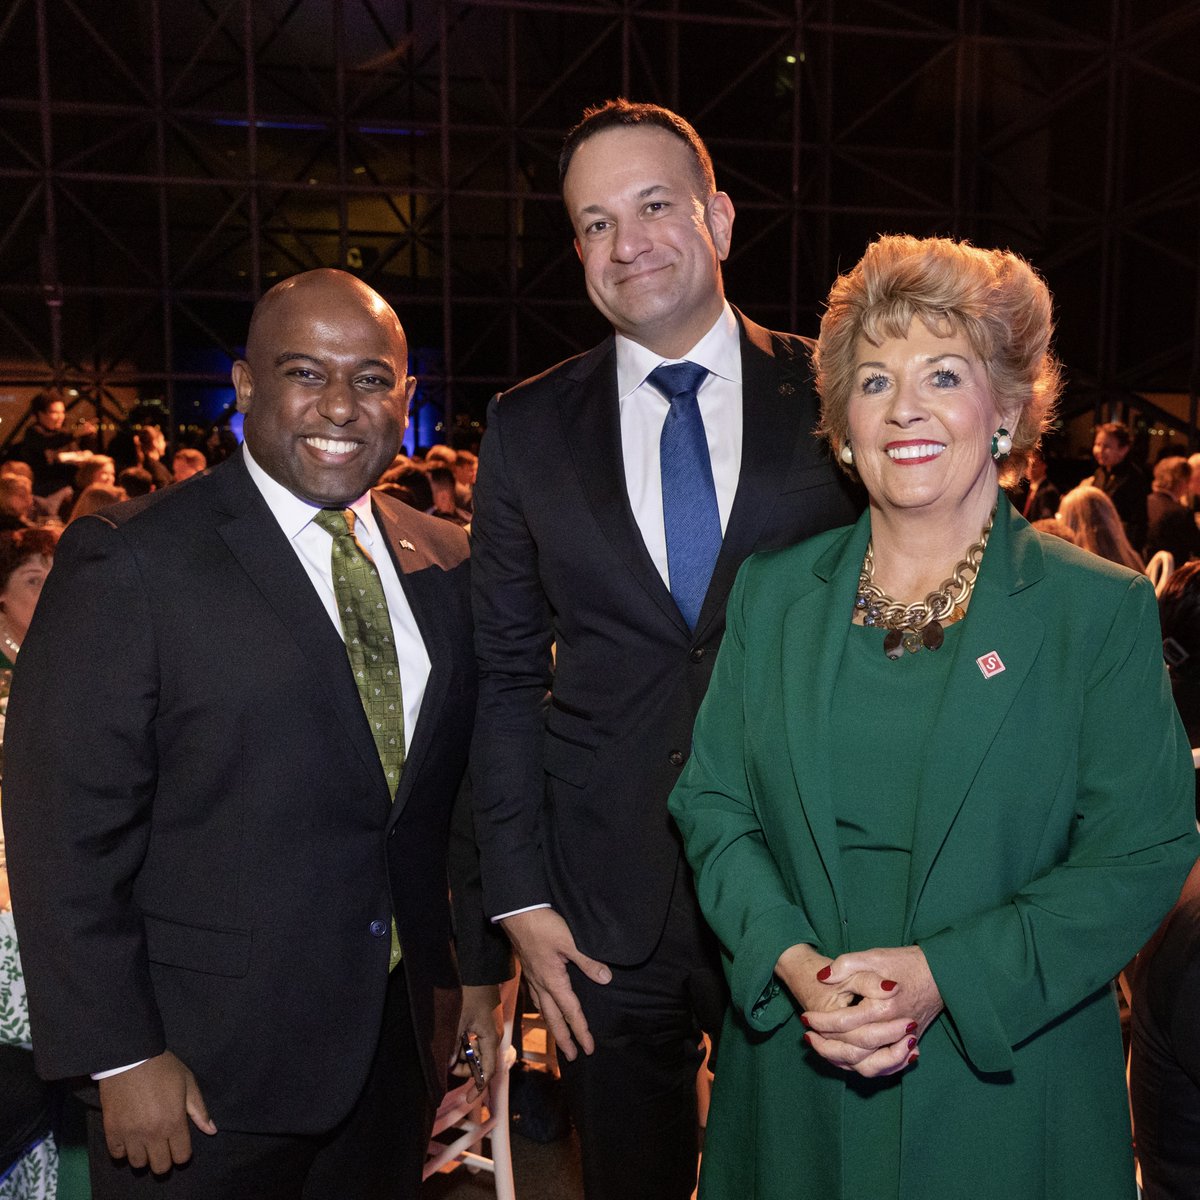 Honored to help welcome @LeoVaradkar, Taoiseach (Prime Minister) of #Ireland 🇮🇪, during his visit to the USA 🇺🇸. Pictured with the brilliant @IrelandAmbUSA during a private dinner at @JFKLibrary. Lá Fhéile Pádraig sona duit! Éirinn go Brách! #GlobalIreland #SaintPatricksDay